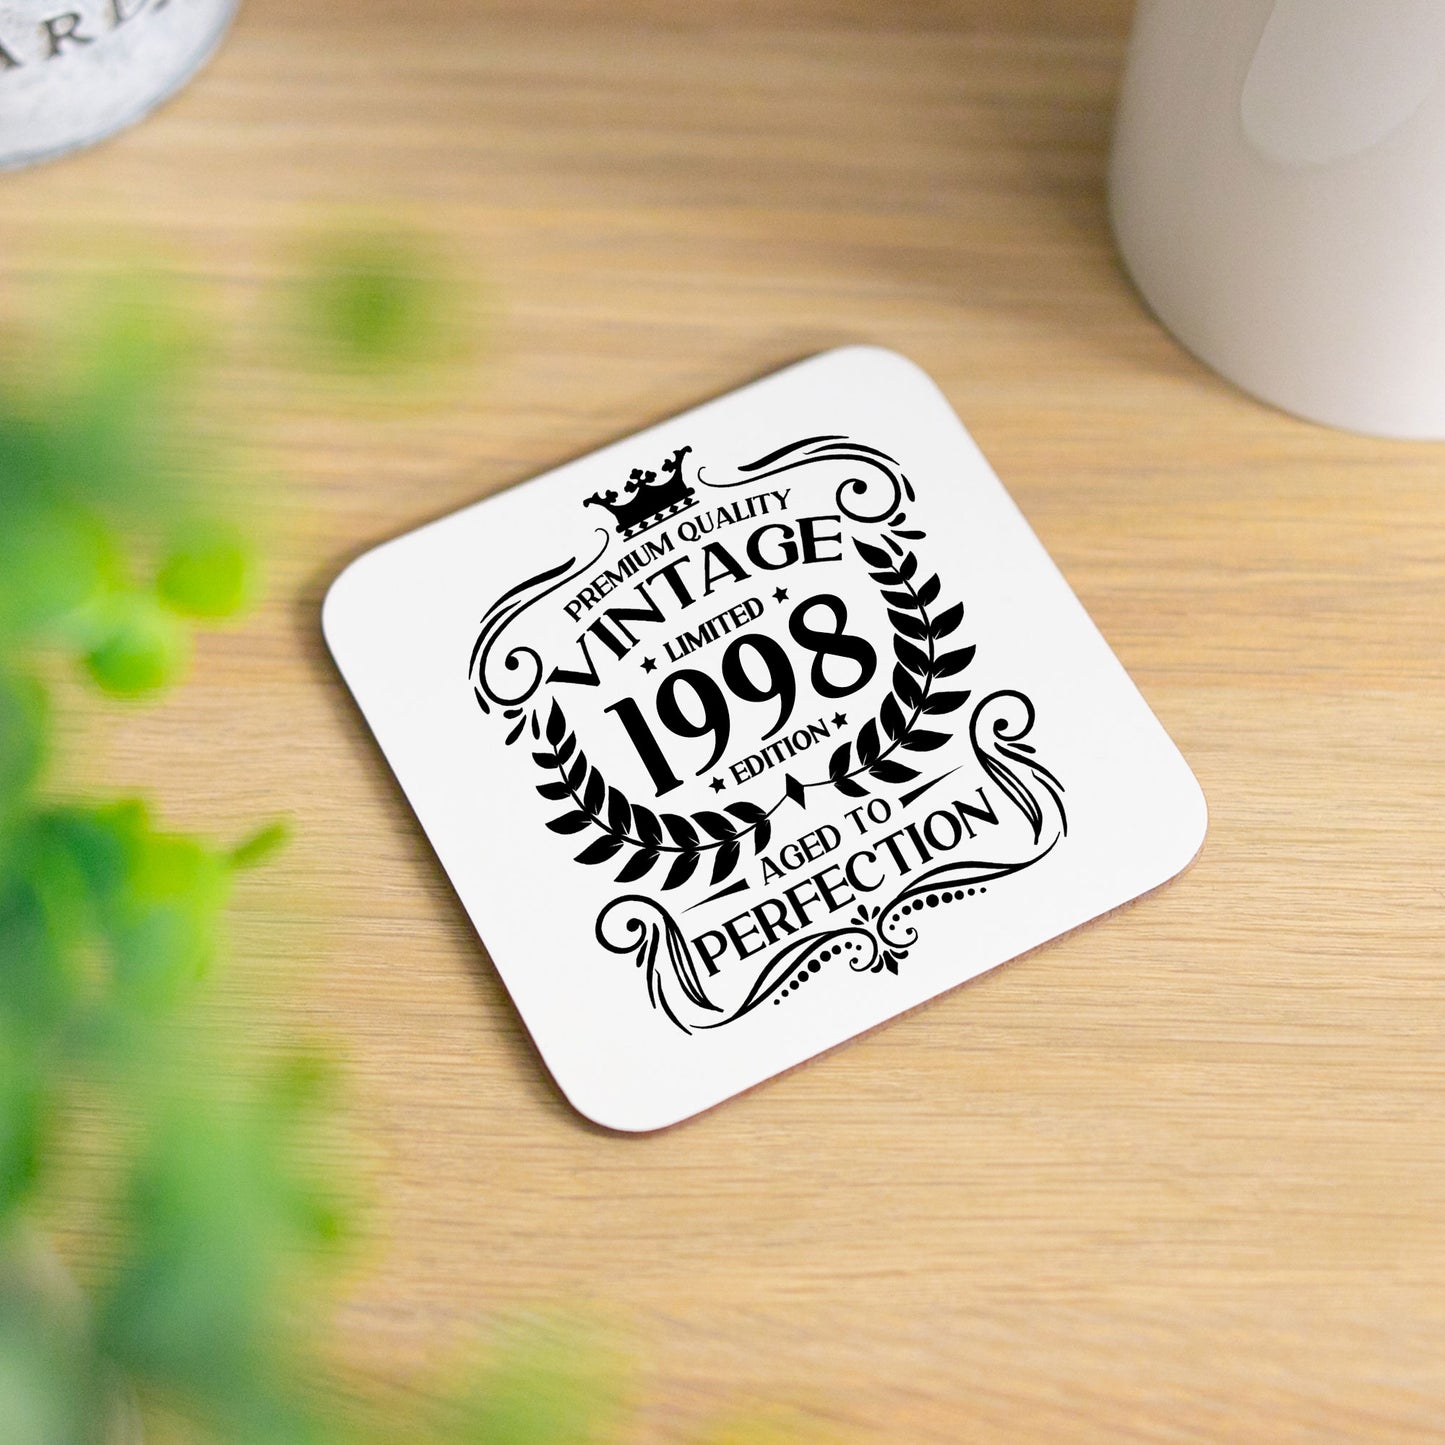 Vintage 1998 25th Birthday Engraved Wine Glass Gift  - Always Looking Good - Glass & Printed Coaster  